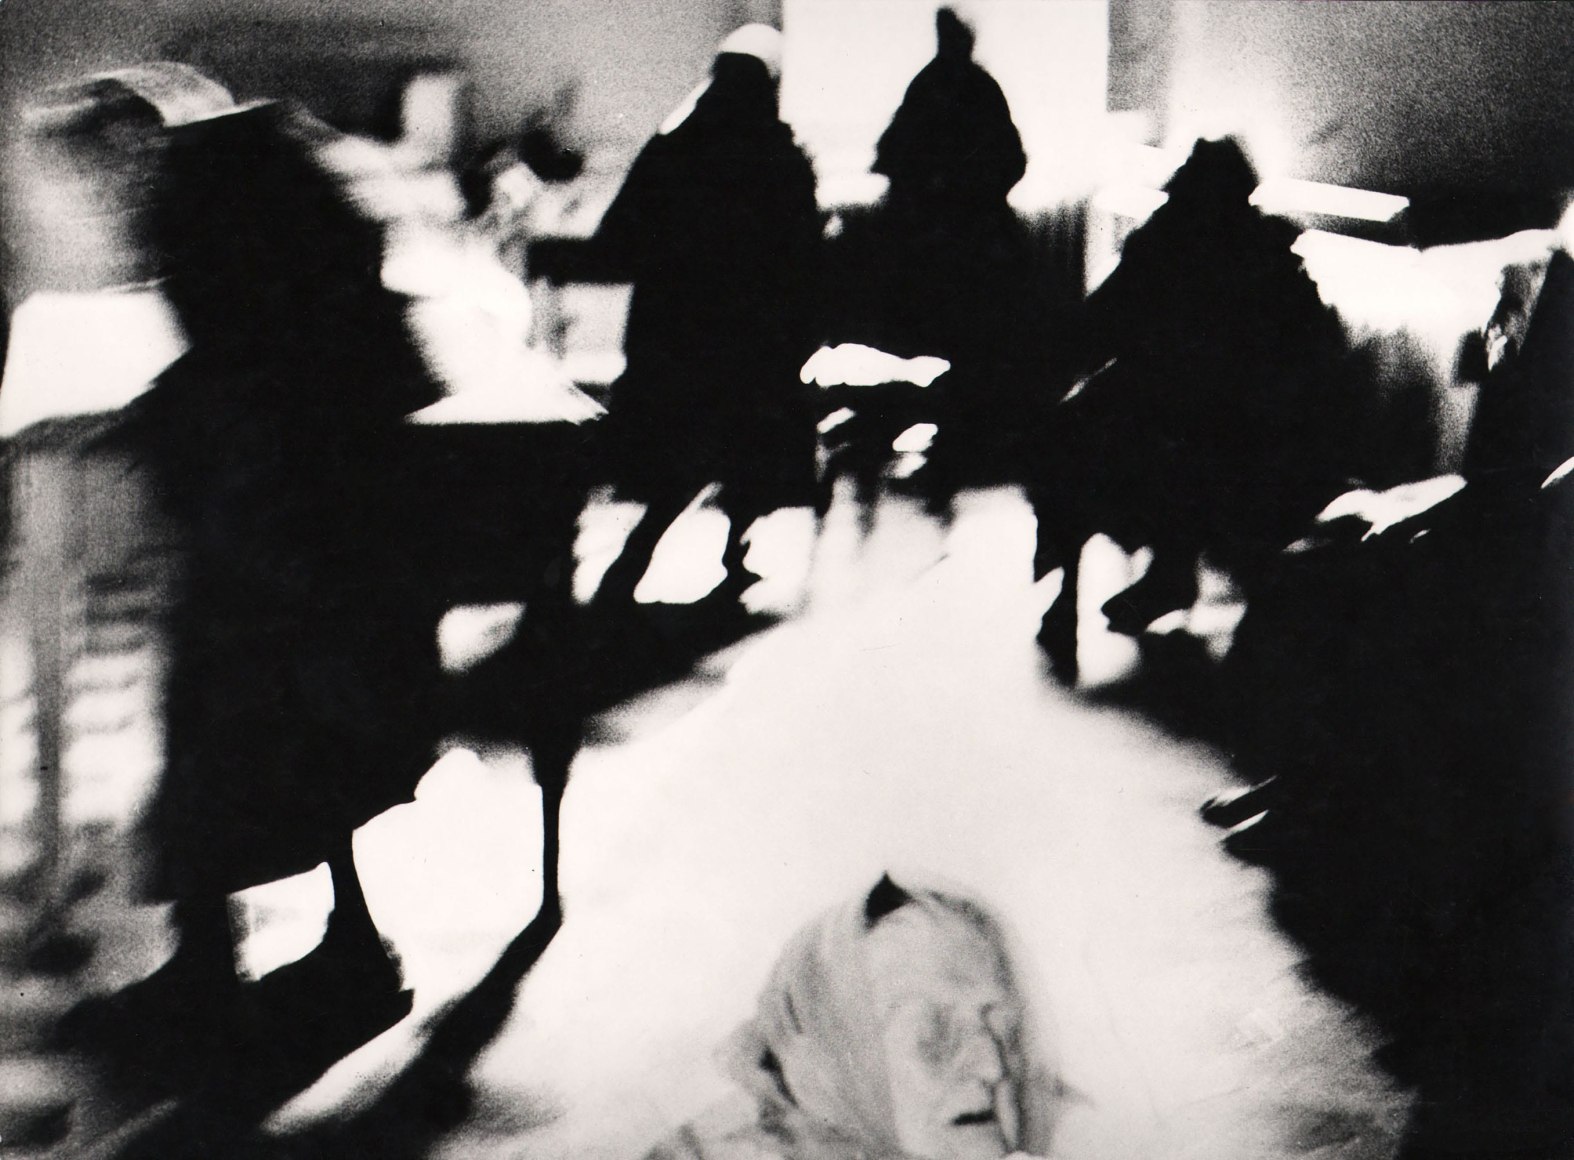 33. Mario Giacomelli, Verr&agrave; la morte e avr&agrave; i tuoi occhi, 1966&ndash;1968. High contrast image, blurred with motion. The head of an old woman with eyes closed in the bottom center of the frame, surrounded by dark silhouettes moving around the room.